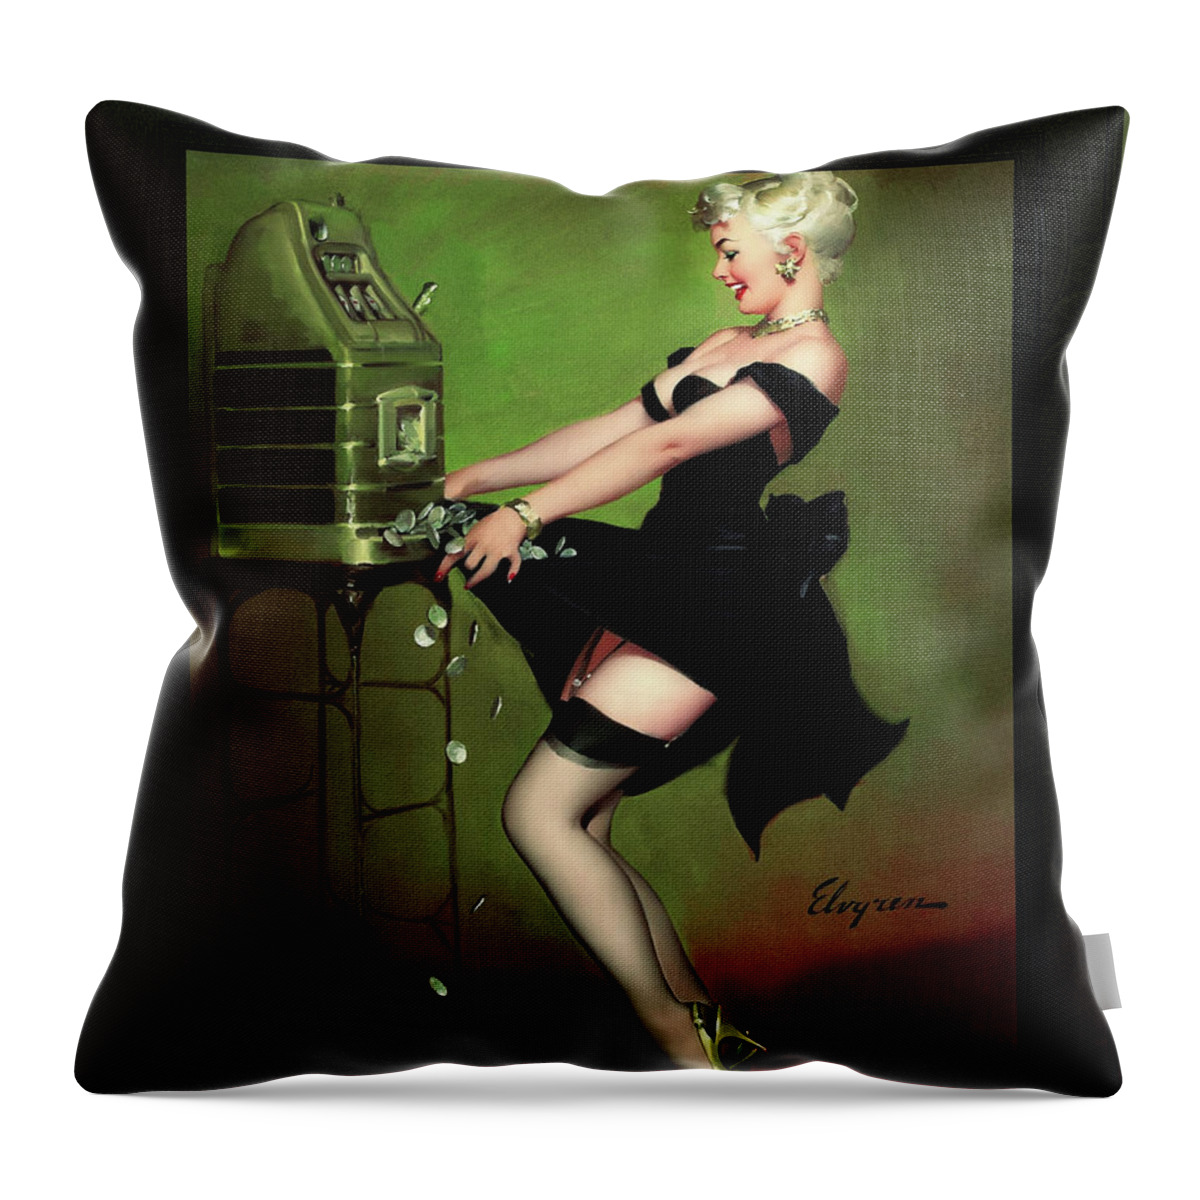 Pot Luck Throw Pillow featuring the painting Pot Luck by Gil Elvgren Vintage Illustration Xzendor7 Art Reproductions by Rolando Burbon